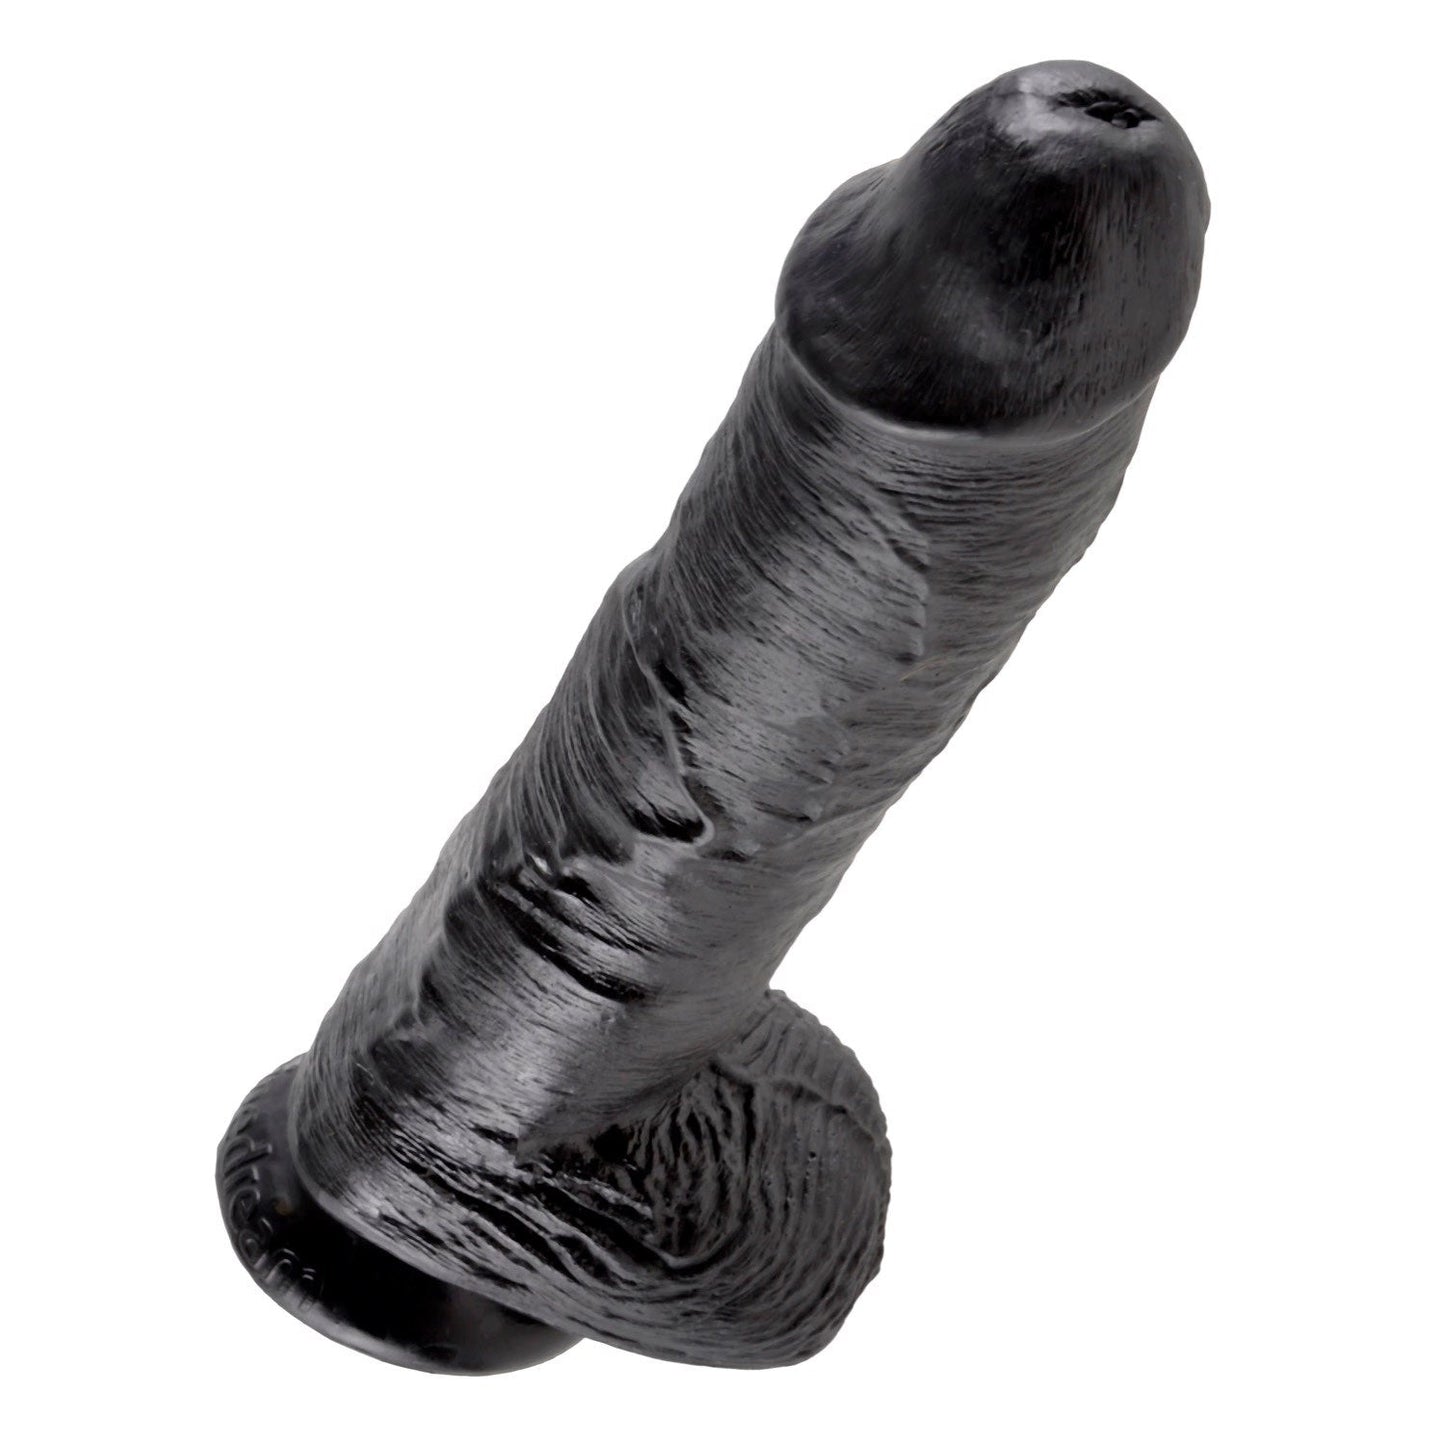 10" Cock With Balls - Black 25.4 cm (10") Dong